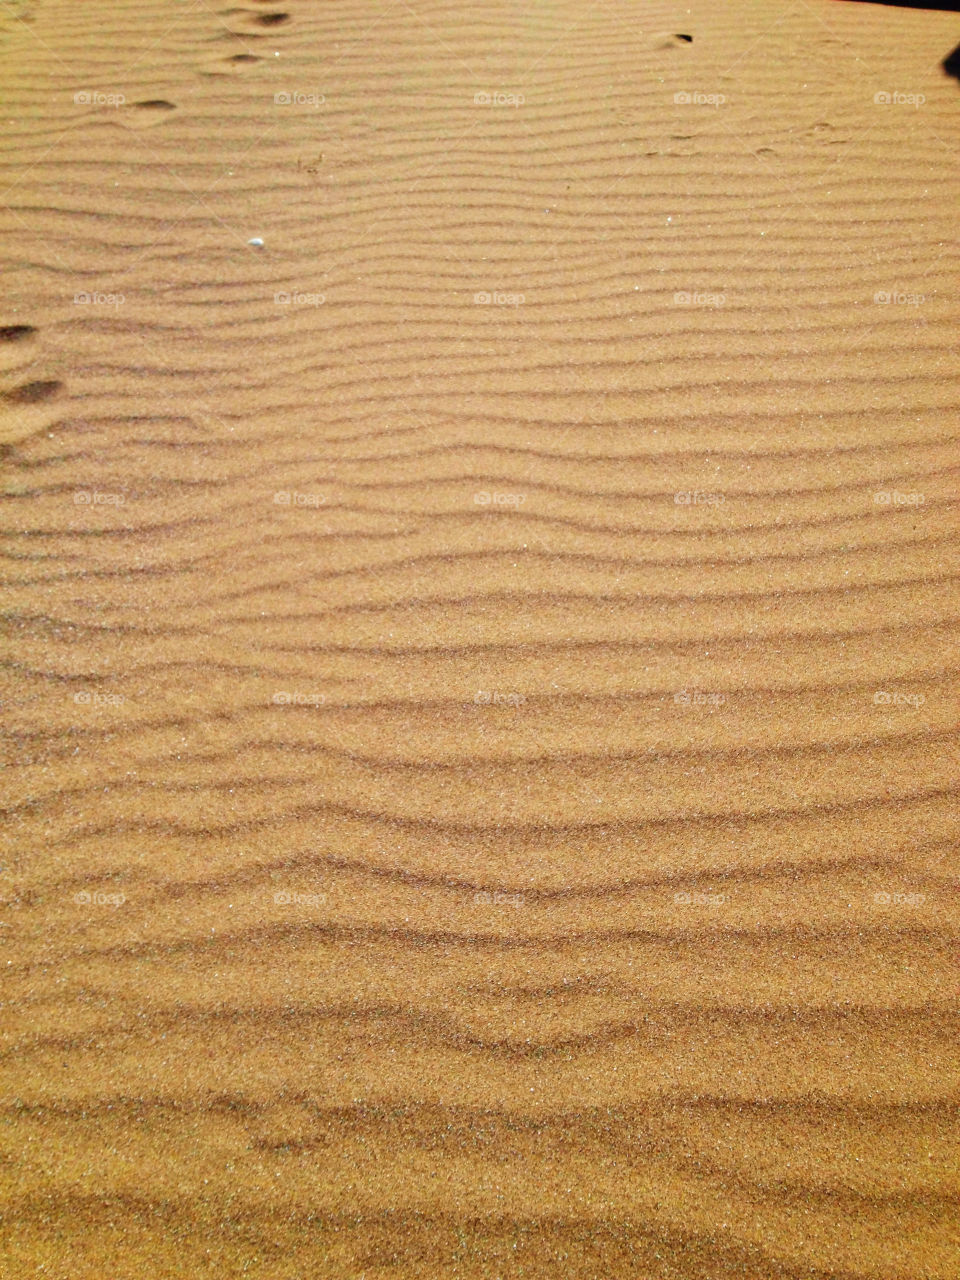 Ripples of the golden sand.